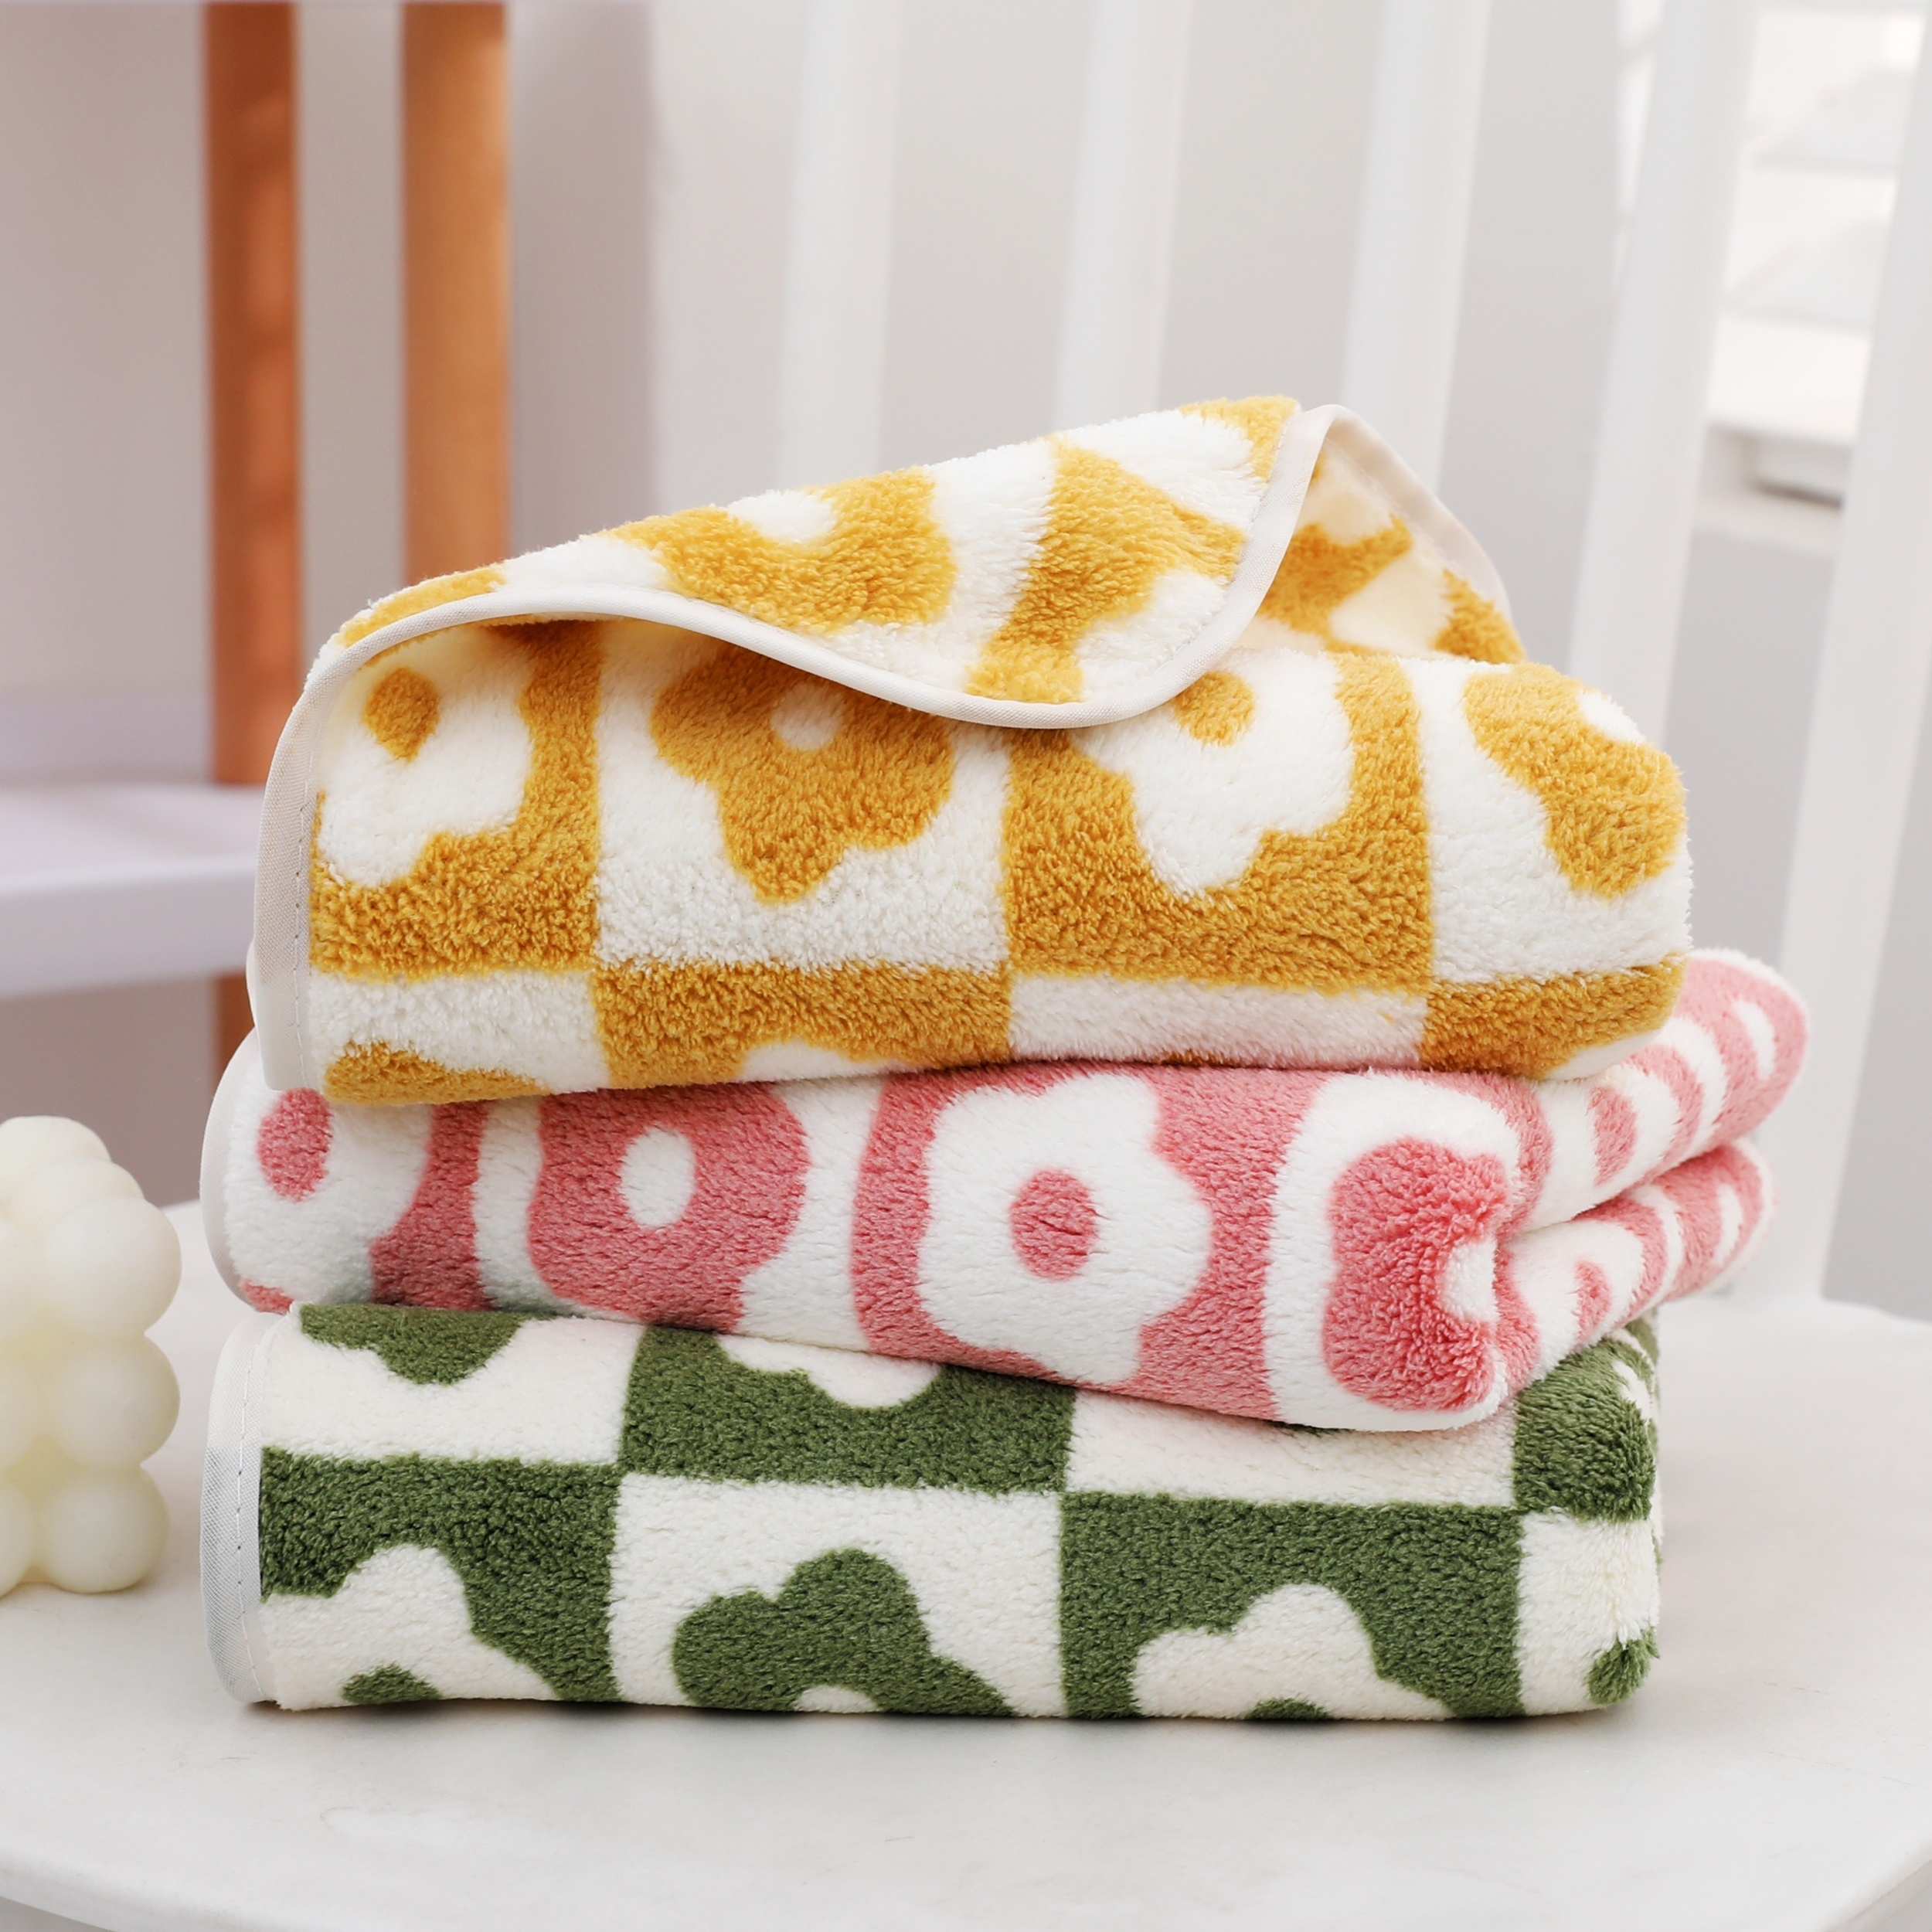 

1pc Plum Flower Pattern Hand Towel, Soft Face Towel, 35*75cm/13.7*29.5in, Green/ Yellow, Bathroom Accessories